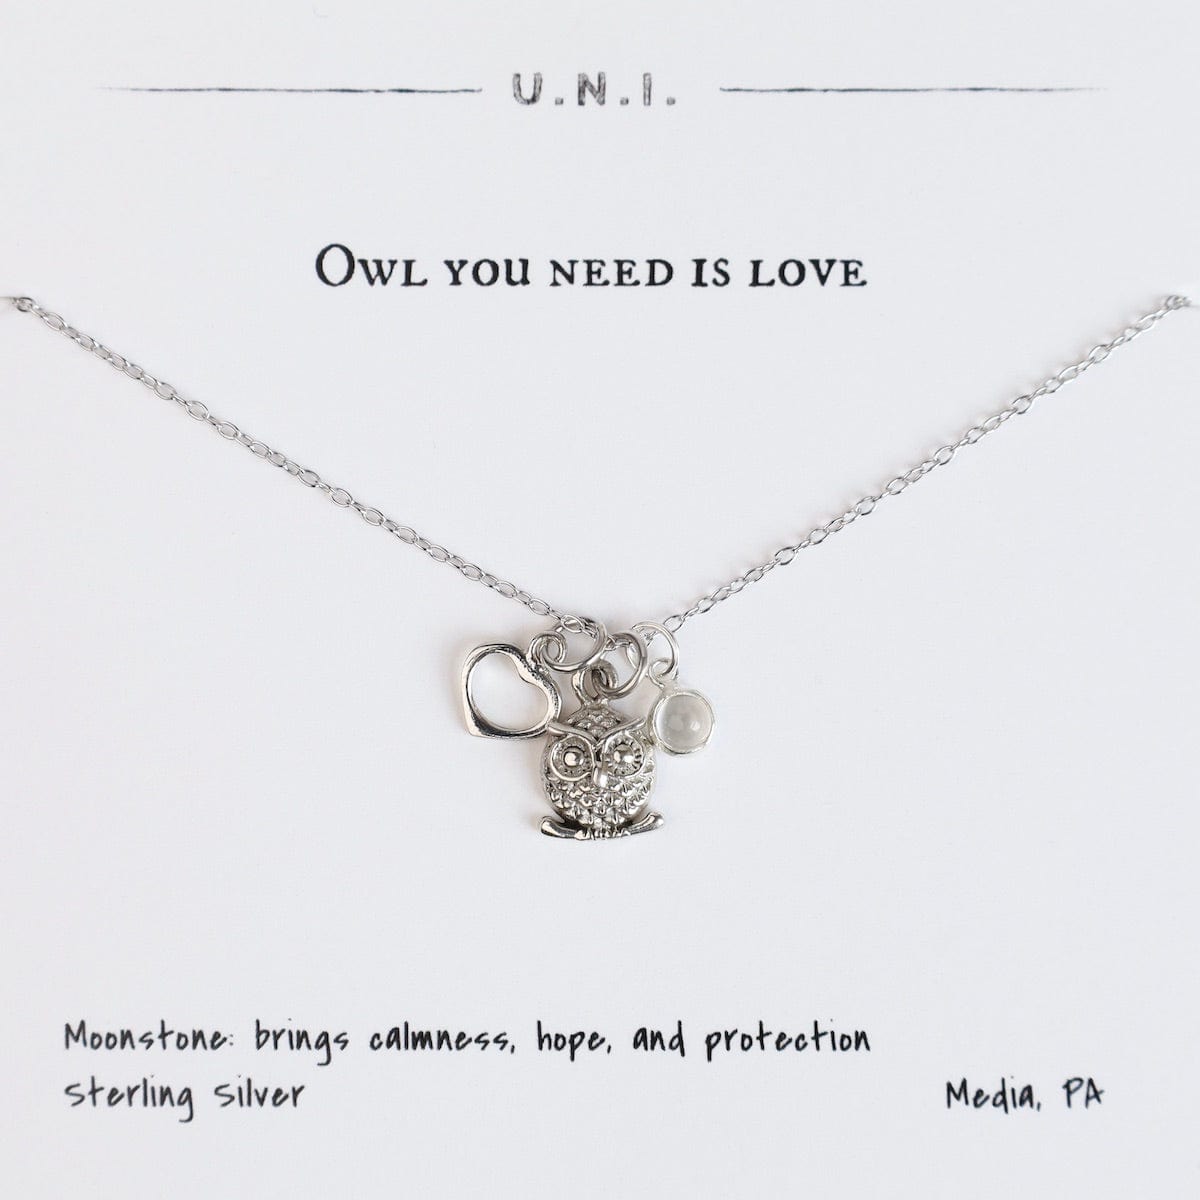 NKL Owl You Need is Love Necklace